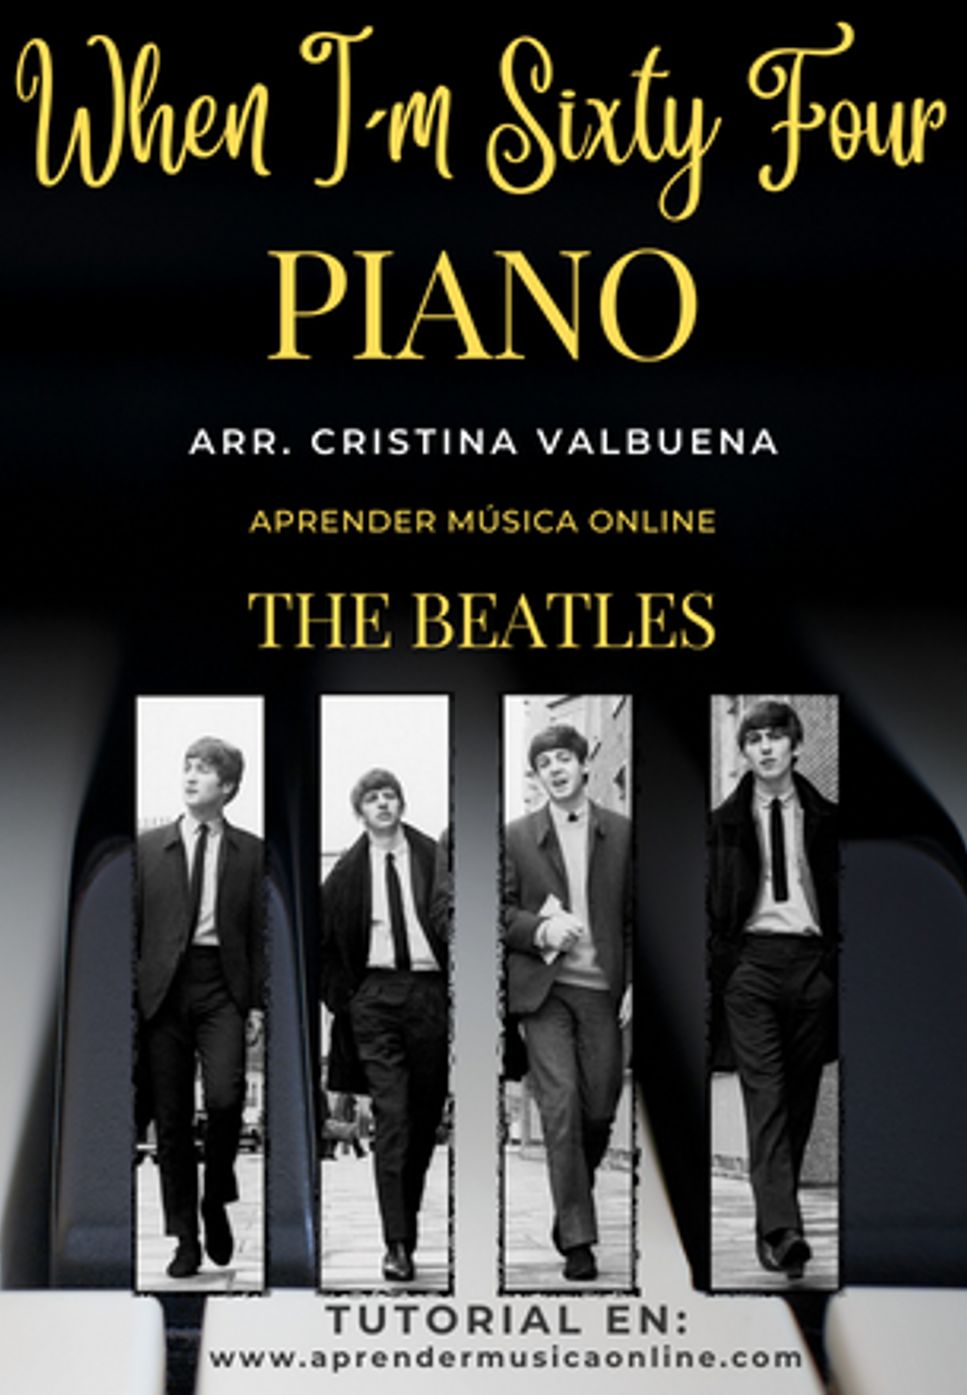 The Beatles - When I´m Sixty Four by Cristina Valbuena